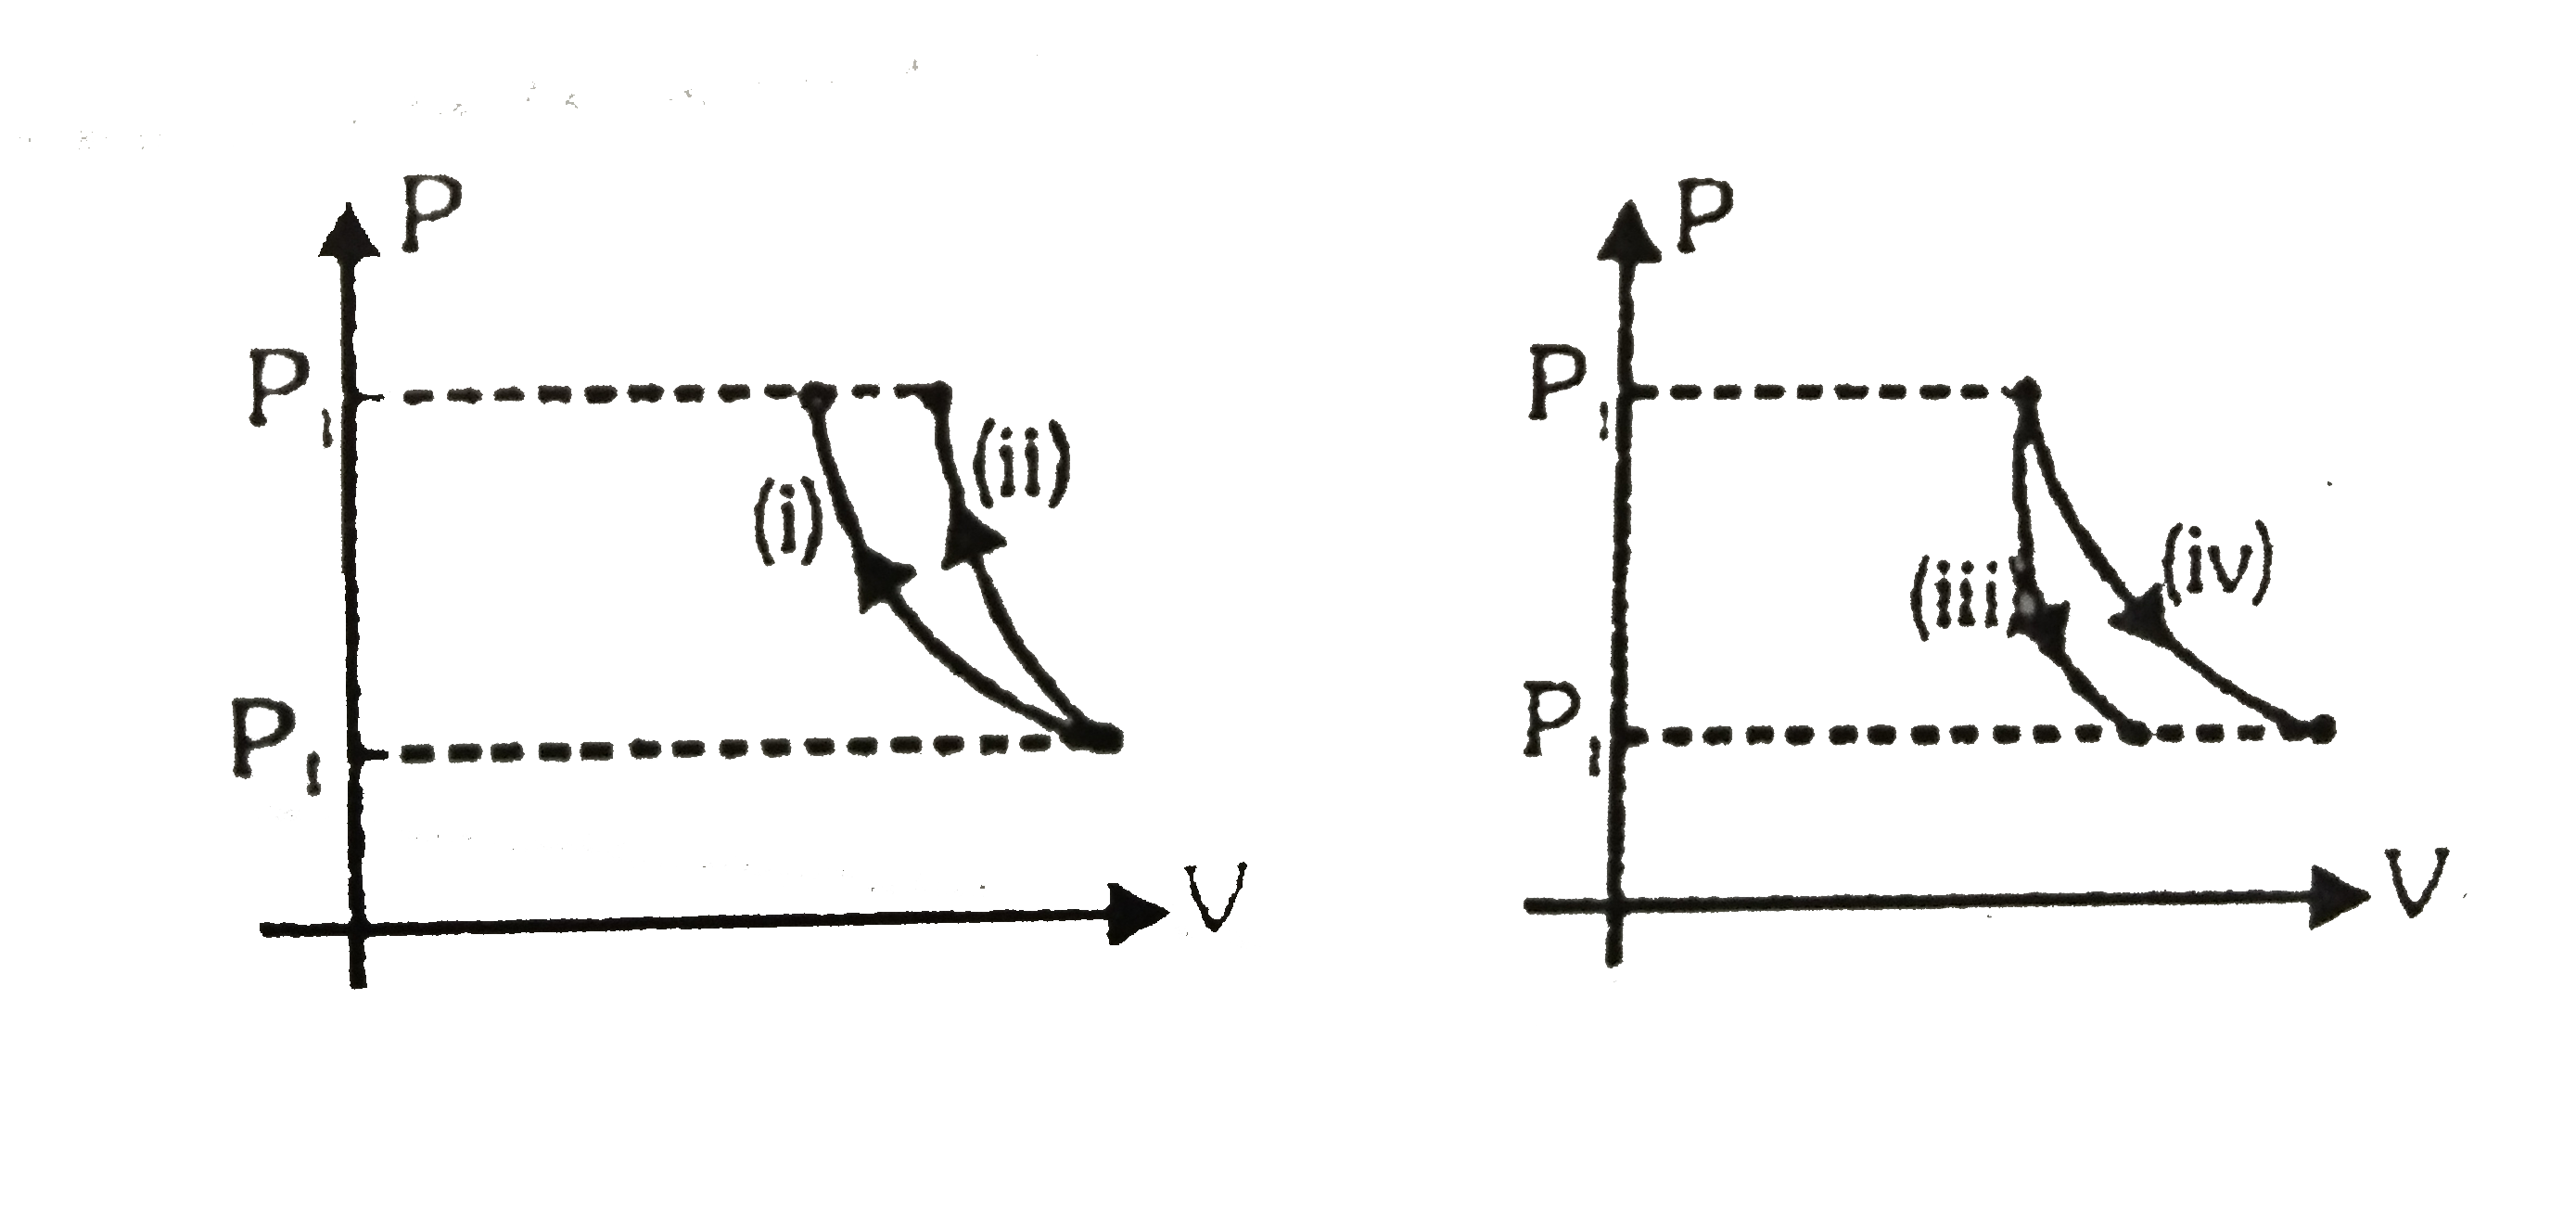 Statement -1 : In following figure curve (i) and (iv) represent isothermal process while (ii) & (iii) represent adiabatic process.      Statement - 2 :The adiabatic at any point has a steeper slope than the isothermal through the same point .